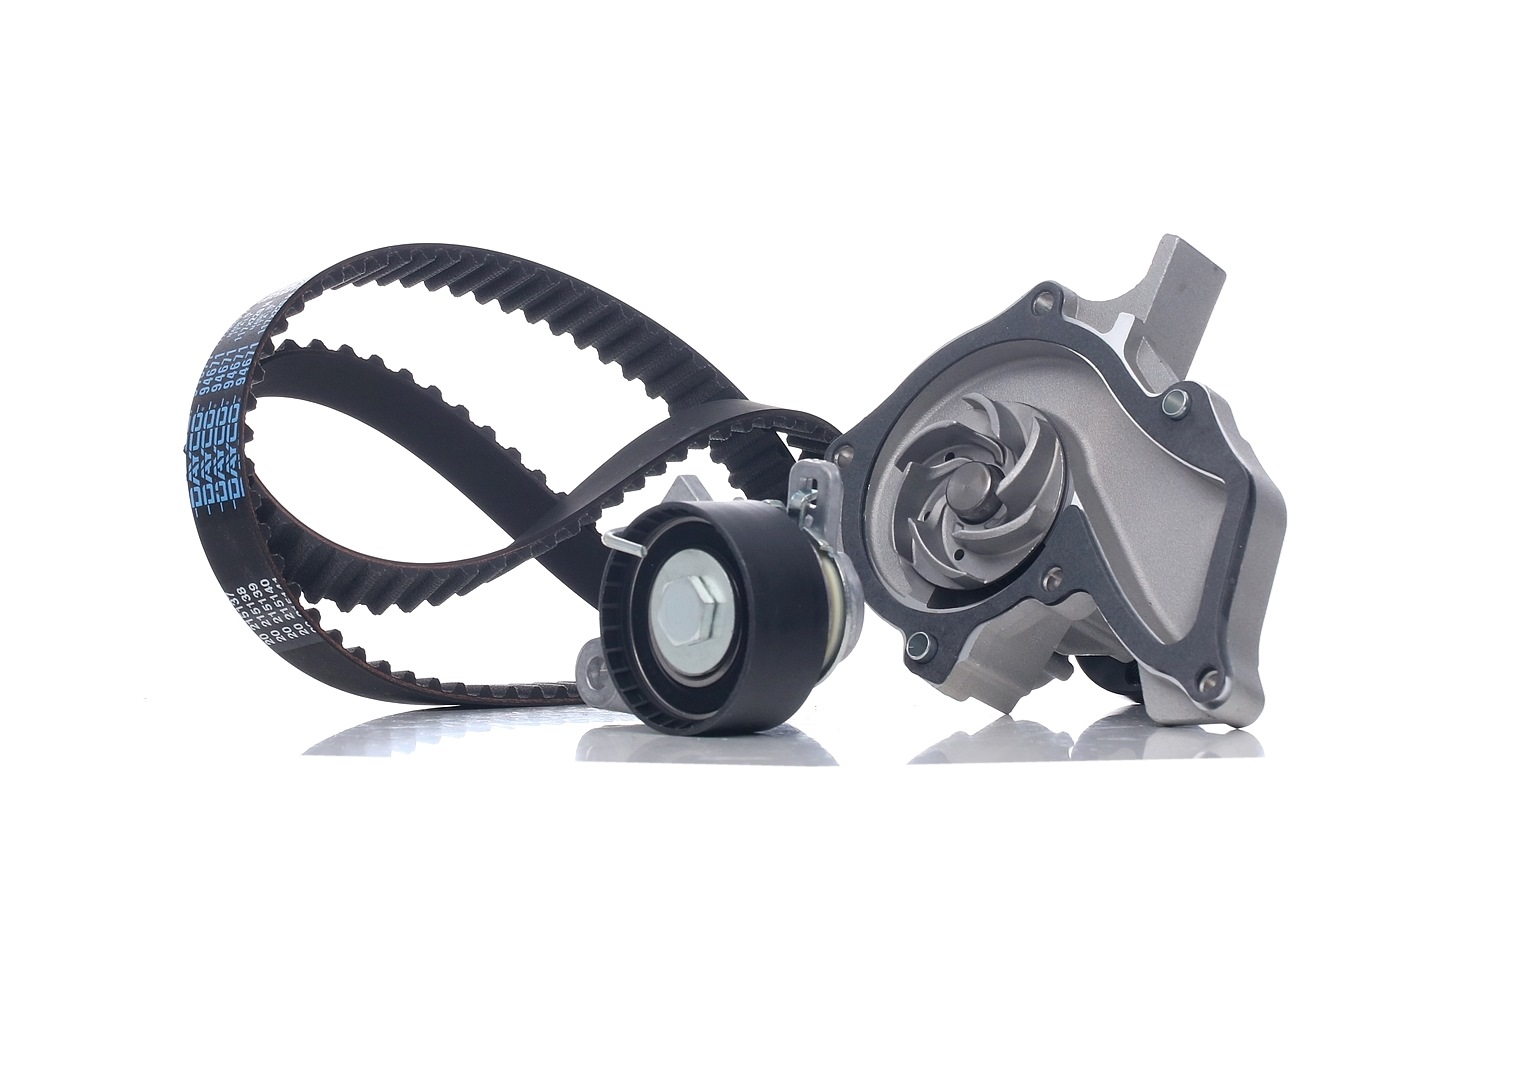 MAGNETI MARELLI 132011160041 Water pump and timing belt kit Number of Teeth: 117 L: 1114 mm, Width: 22 mm